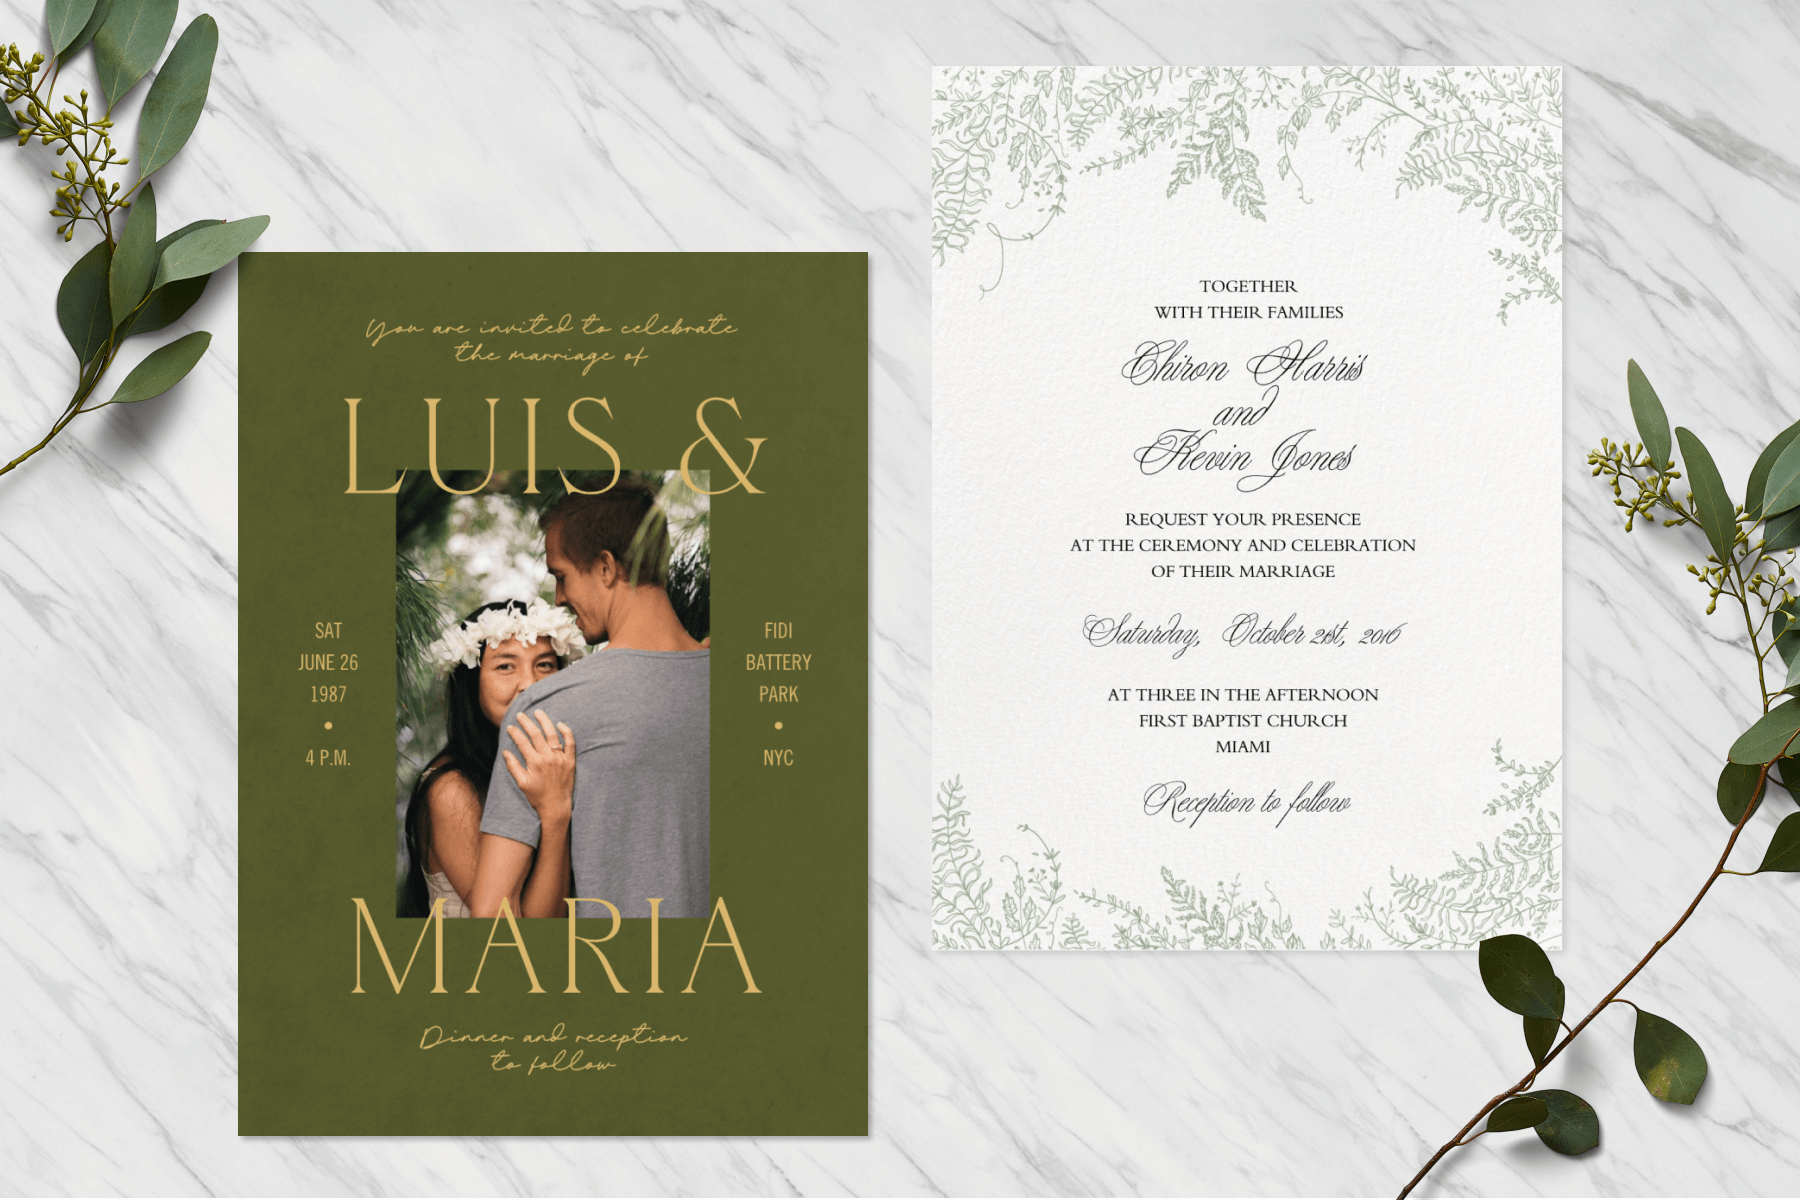 Two wedding invitations are side by side on a white marble surface with sprigs on either side.